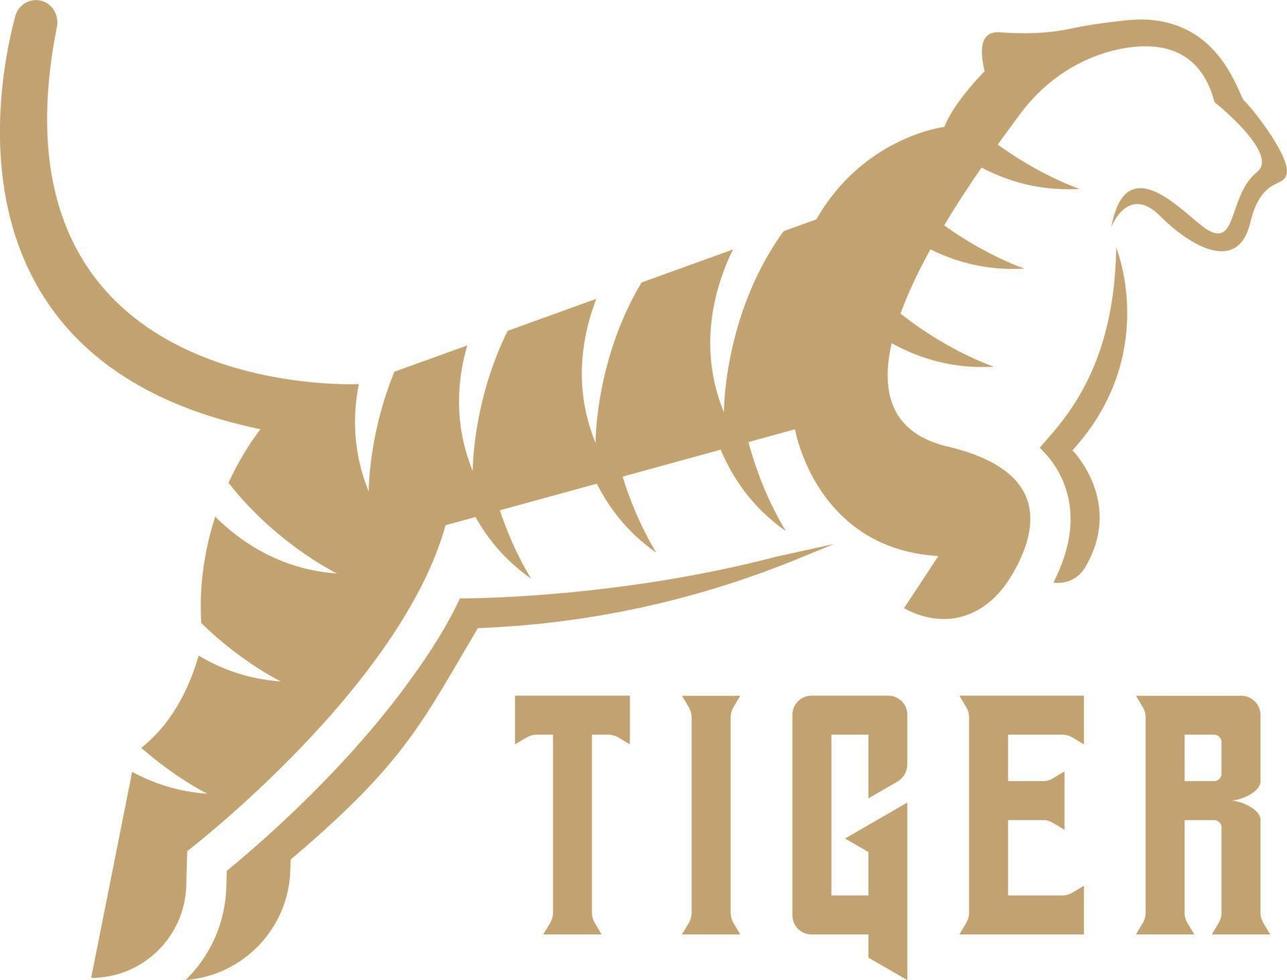 Minimalist Jumping Tiger logo, suitable for various creative business orientations. vector